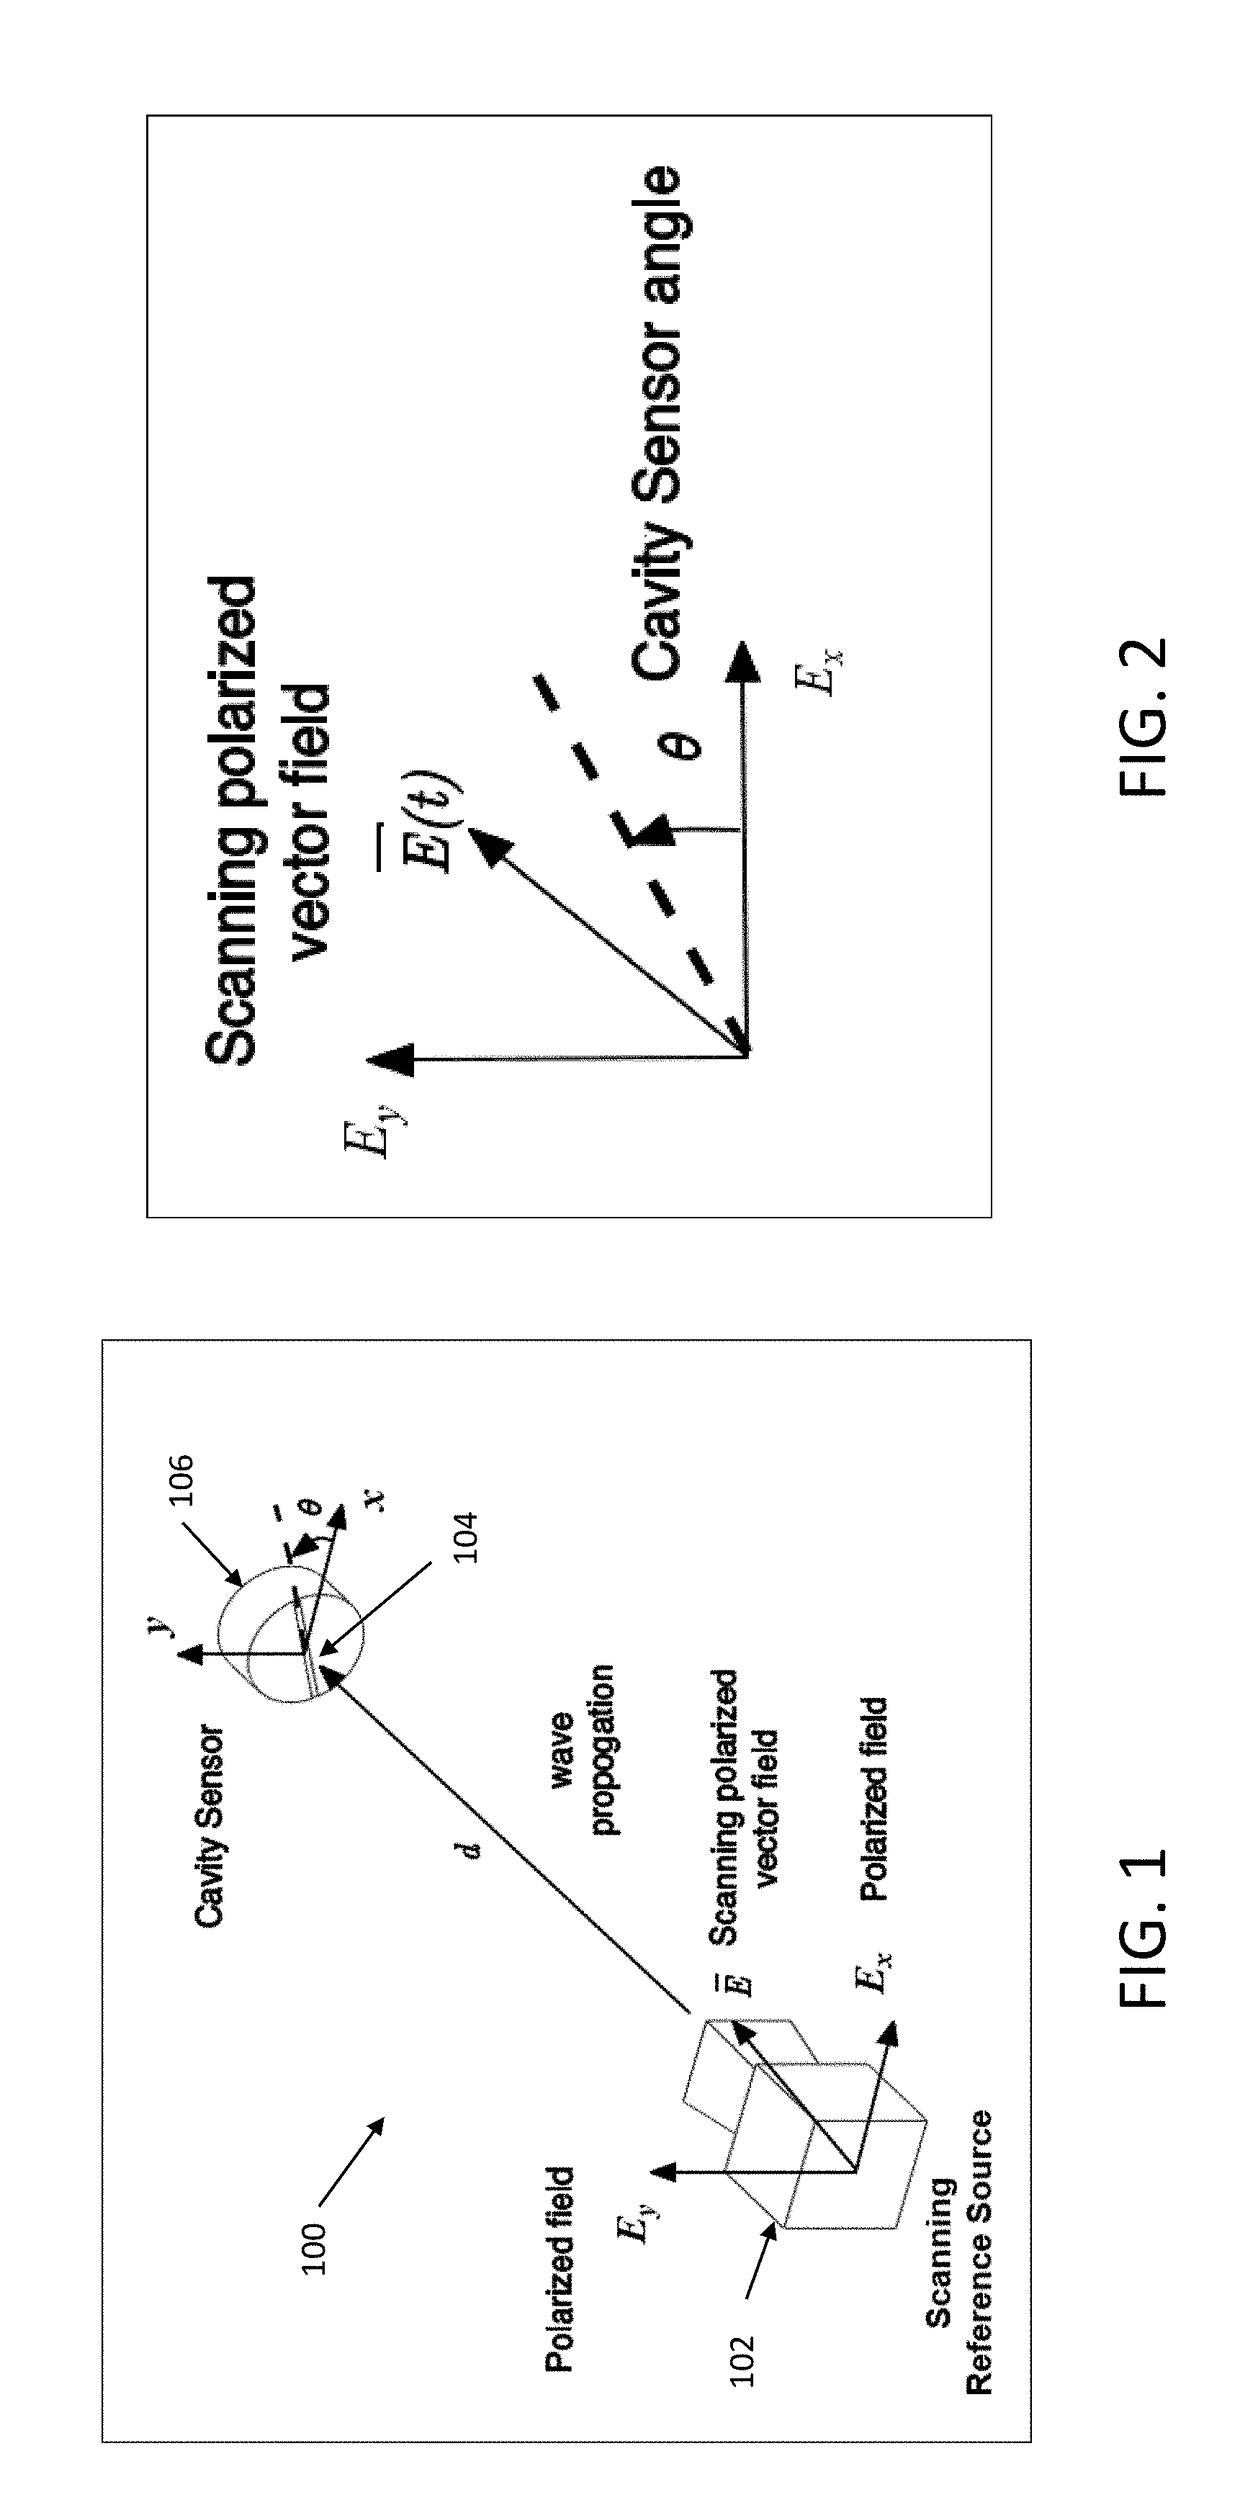 Non-GPS Methods and Devices For Refueling Remotely Piloted Aircraft